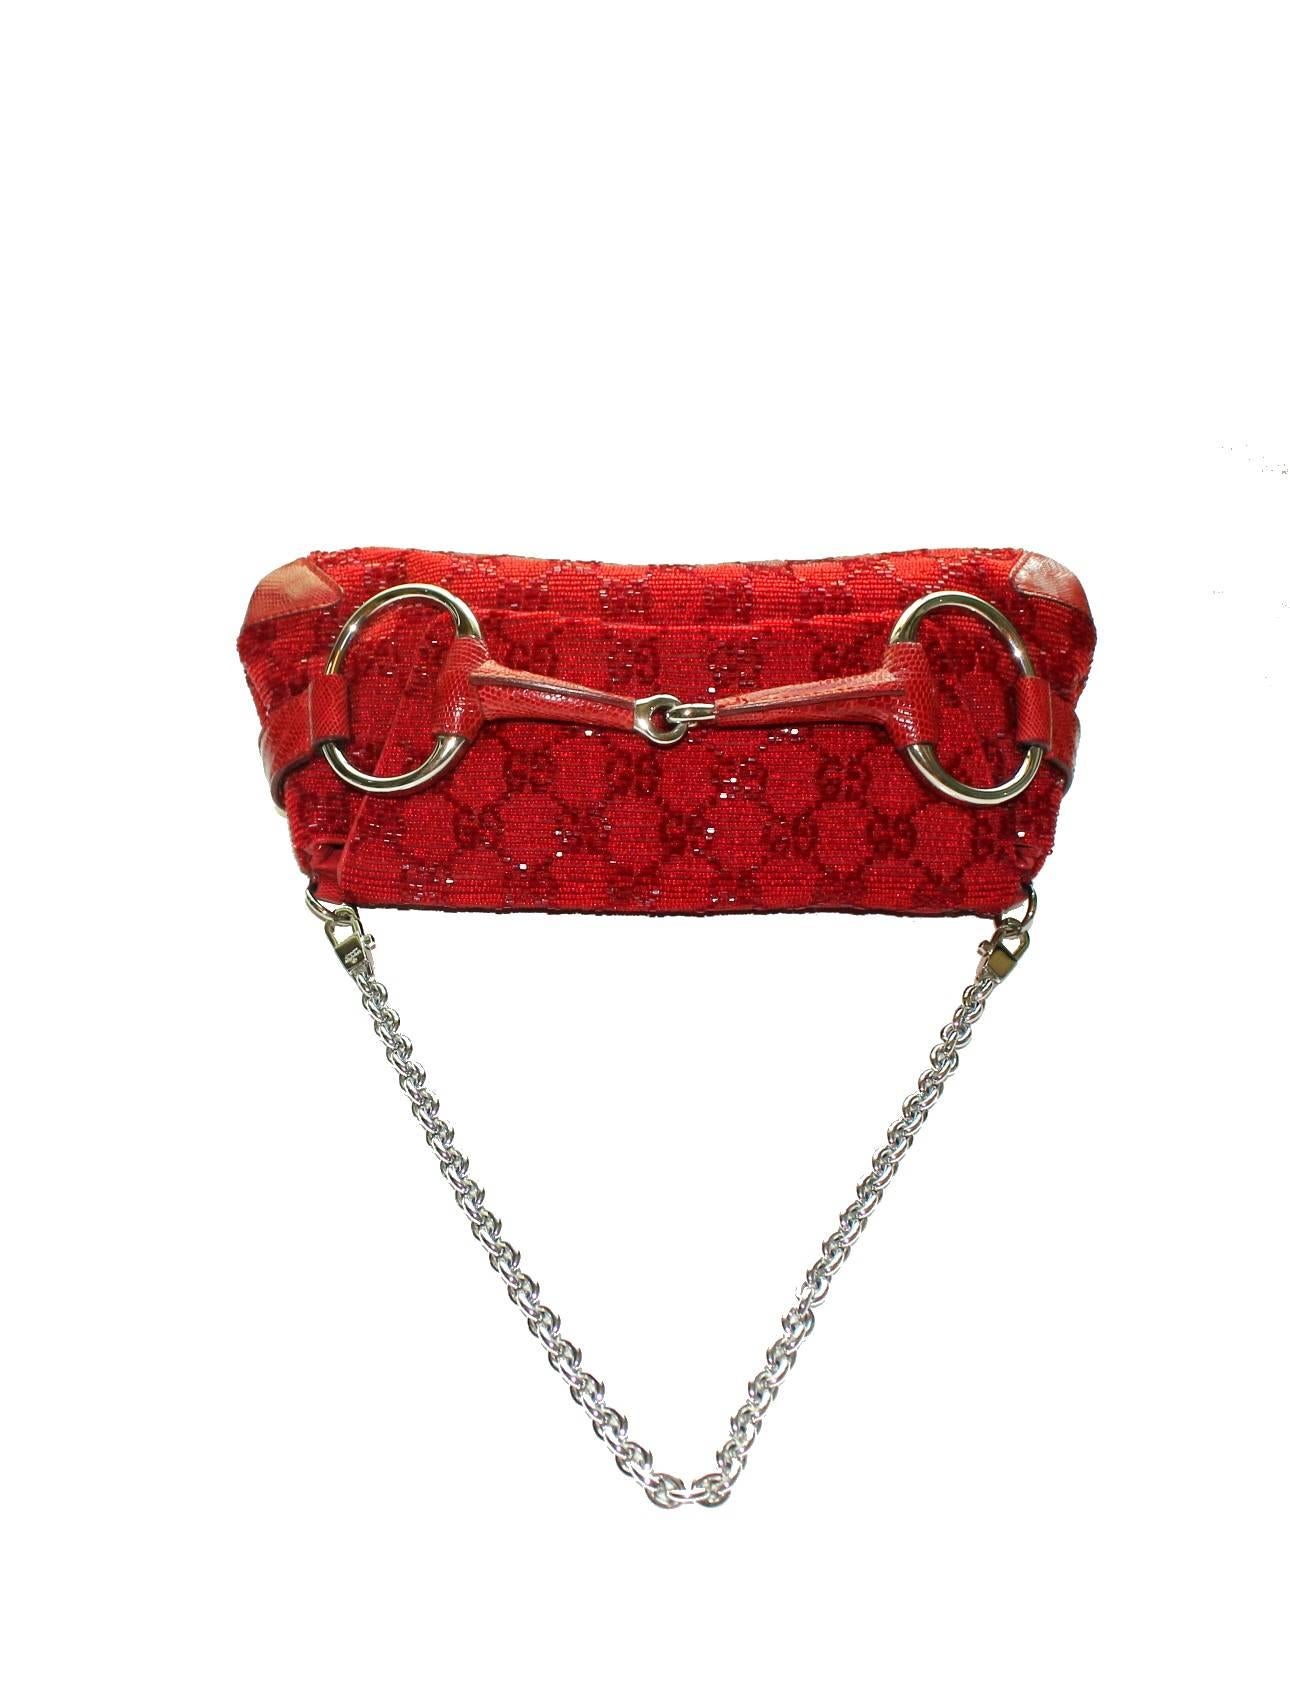 A Gucci signature piece in the famous GG Monogram

Beautiful beaded red bag with lizard skin trimmings
Famous Gucci signature horsebit design
White-gold colored hardware
Detachable strap discreedly engraved with 